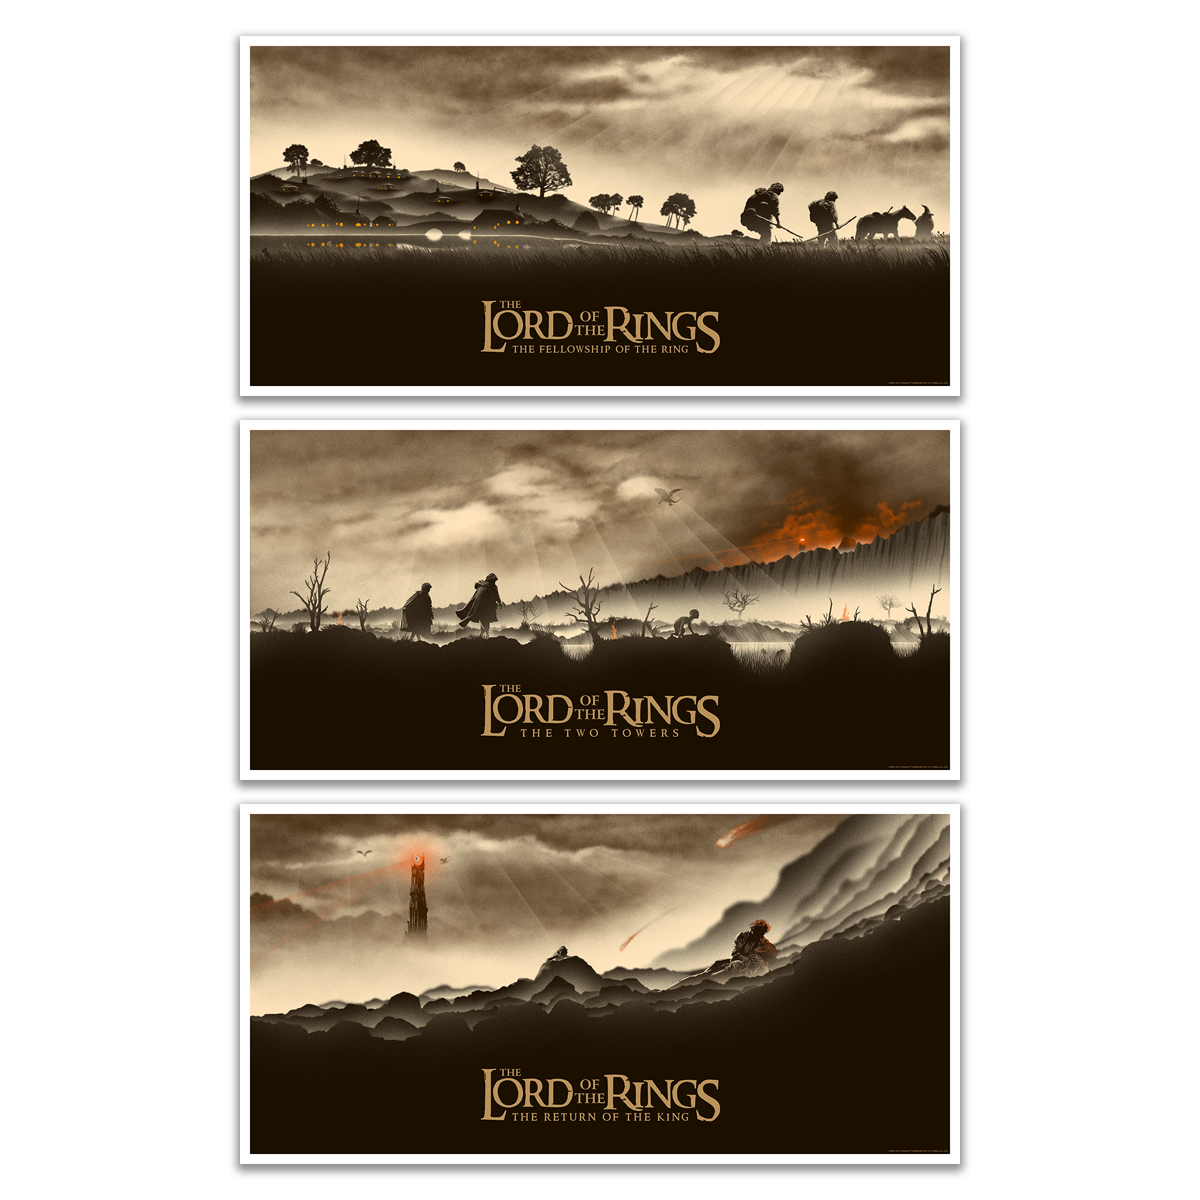 Conor Smyth "The Lord of the Rings: Trilogy" Variant SET